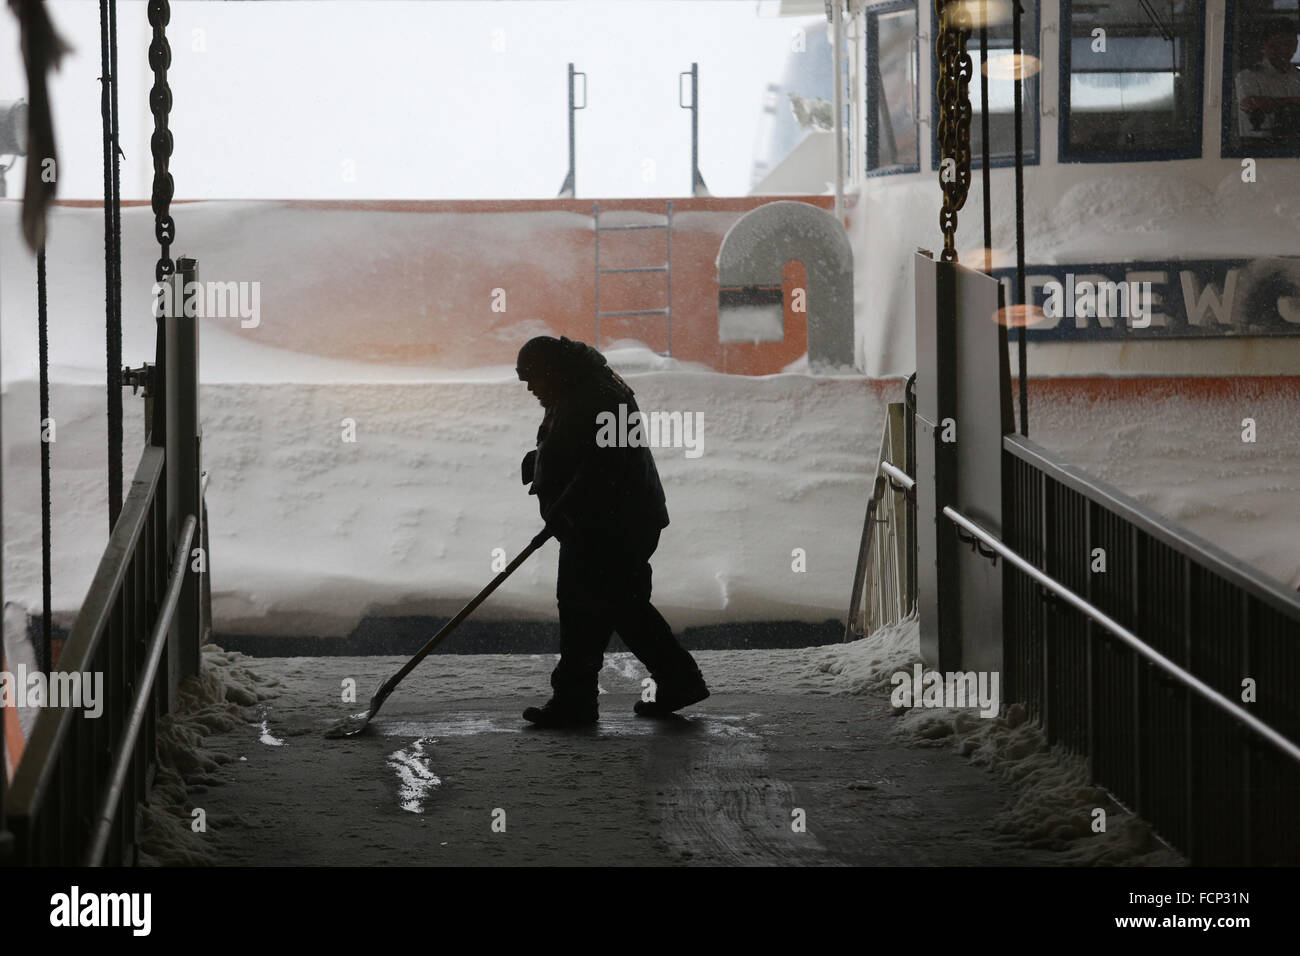 New York, New York, USA. 23rd Jan, 2016. A DOT employee removes snow off of the ramp before passengers depart the Staten Island Ferry in St. George terminal during Winter Storm Jonas. A travel ban had been in place for hours, but the ferry still operated. Snowfall projections for Staten Island were approximately 12-18in, with winds gusting up to 50 miles an hour. Late afternoon, buses ceased to run and a travel ban was enforced by the NYPD. This lack of transportation stranded many residents of Staten Island who had taken the ferry home. People were forced to try and walk to their destination Stock Photo